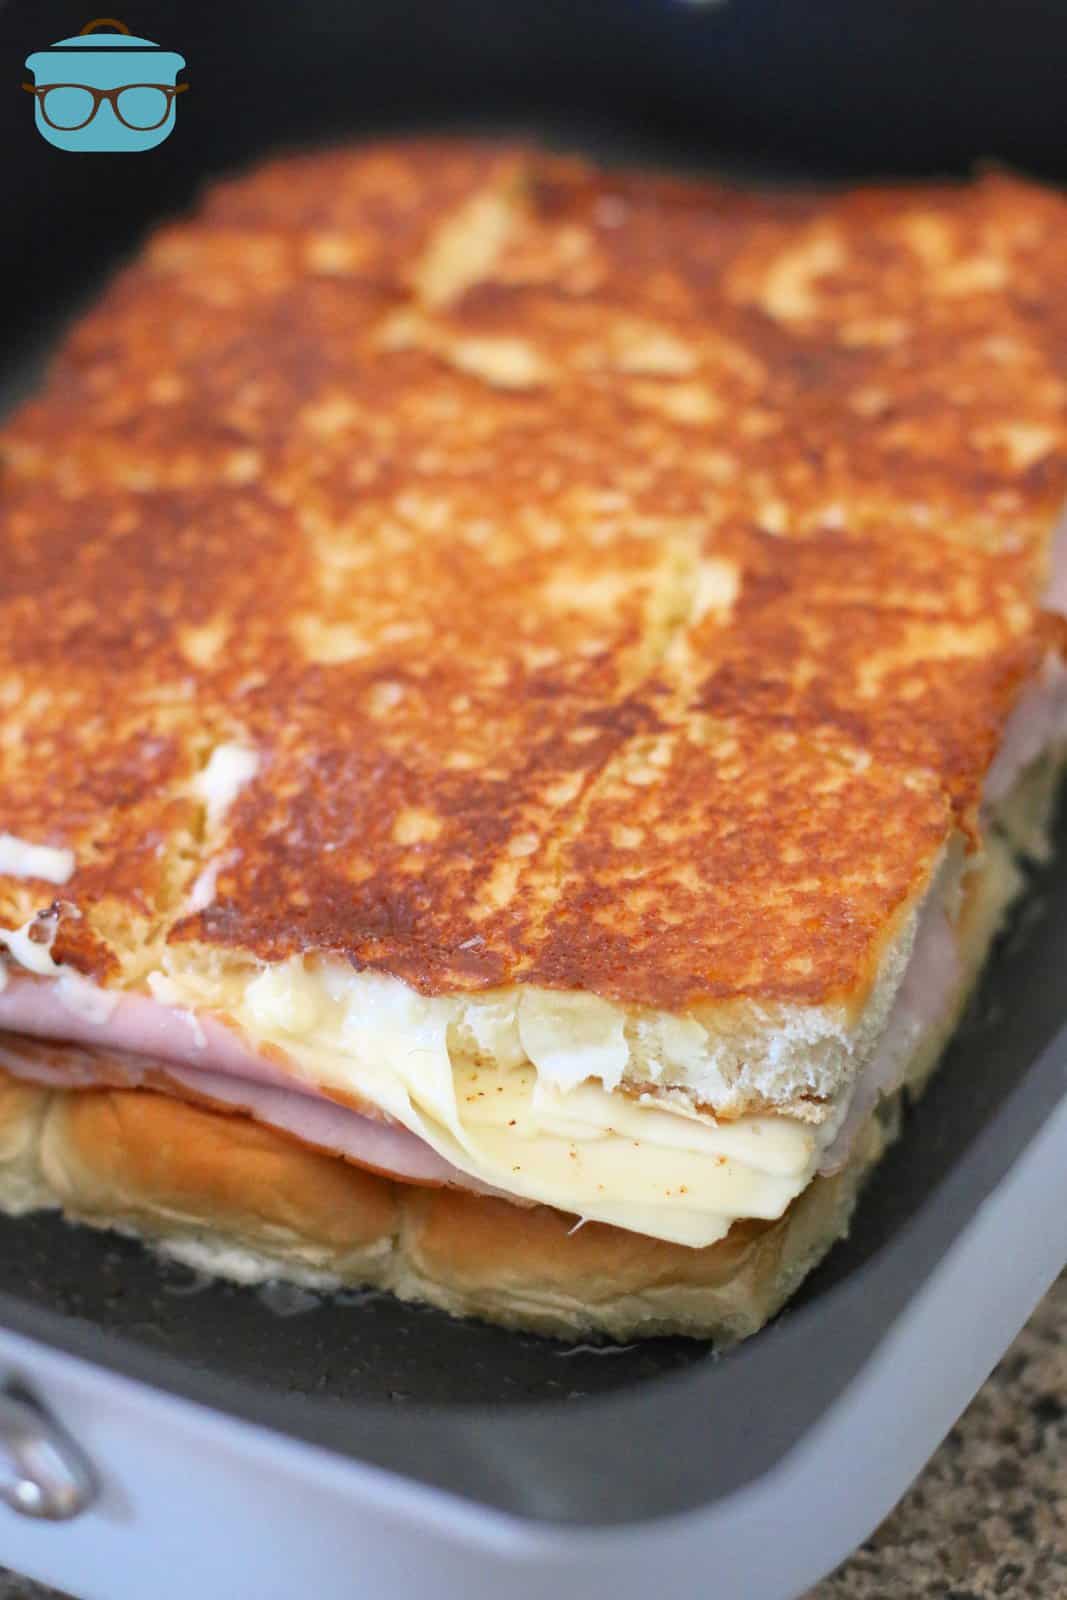 grilled cheese shown in a skillet.